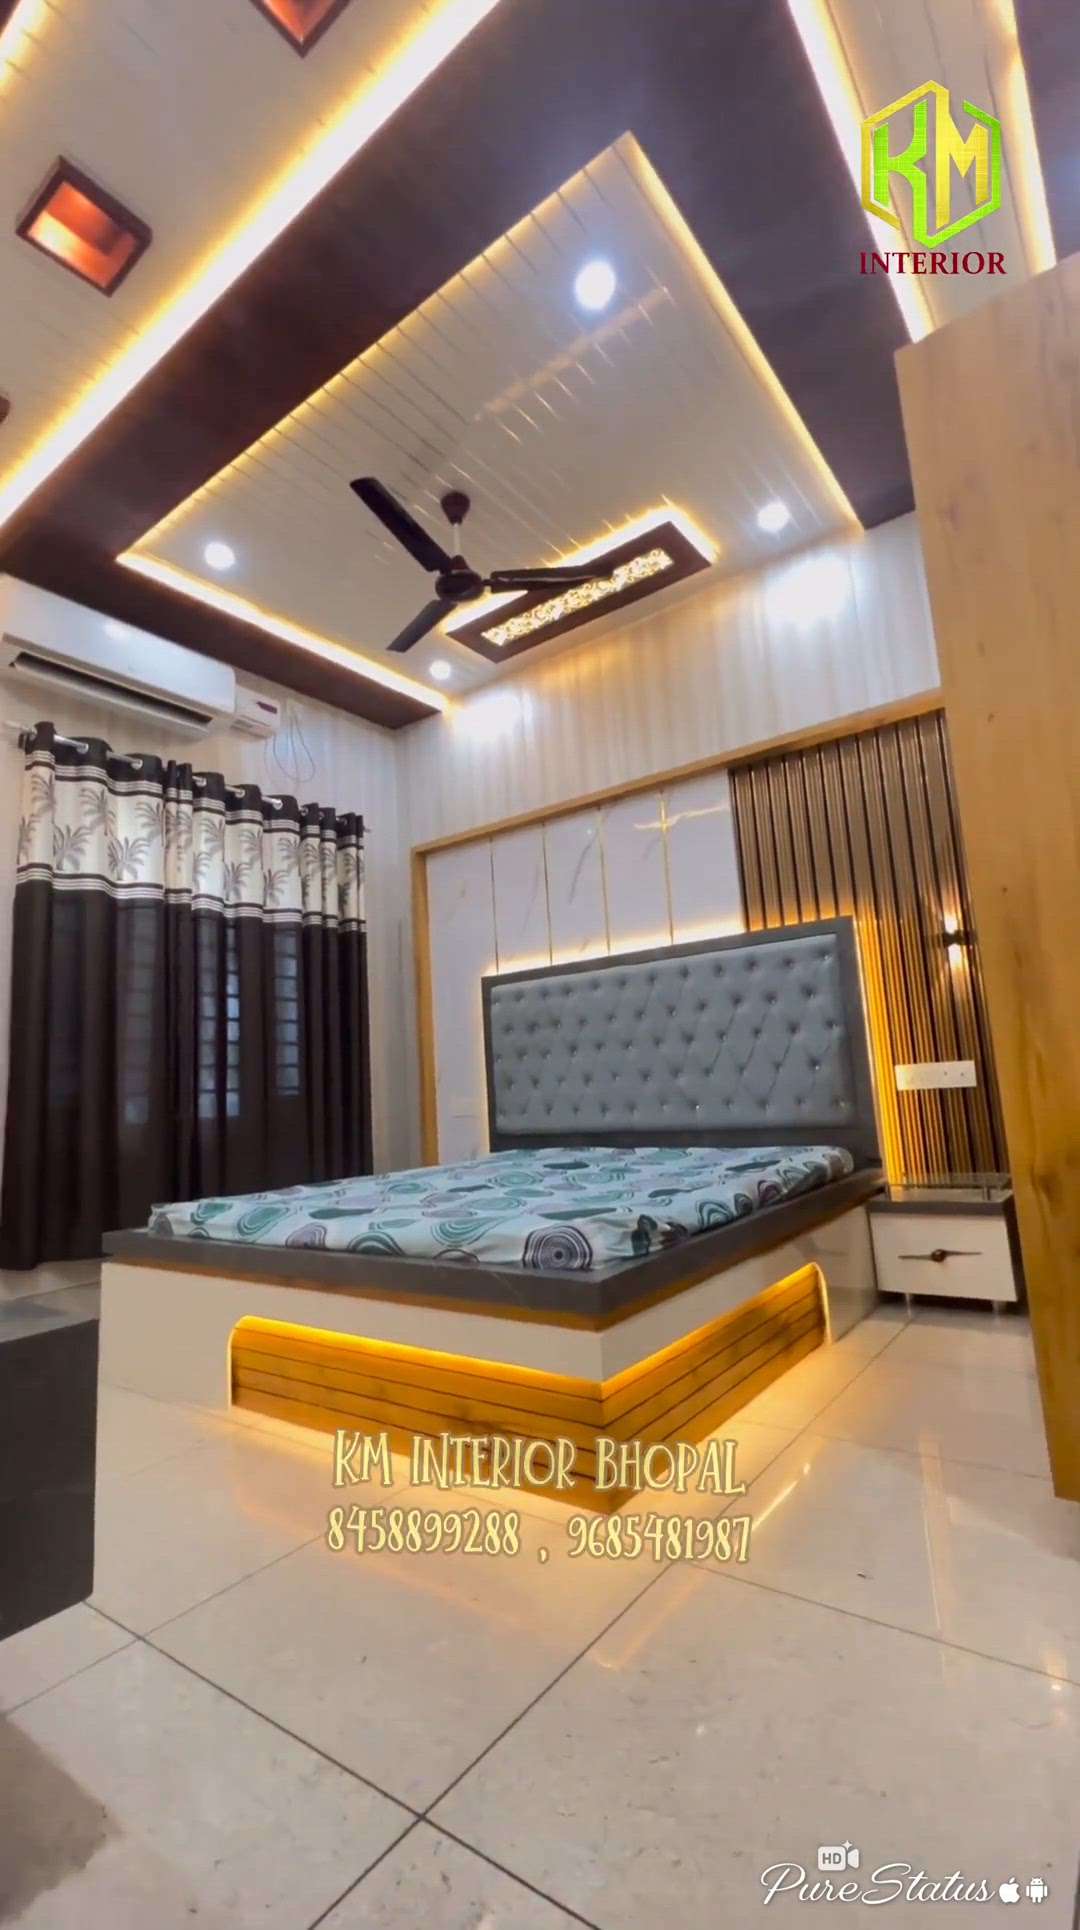 KM INTERIOR BHOPAL
8458899288 , 9685481987

#BedroomDecor #PVCFalseCeiling #pvcceilingdesign #pvcceiling #bedDesign #WardrobeDesigns #bedroomtvunit  #homeinterior #bhopal_the_city_of_lakes #bhopalcity